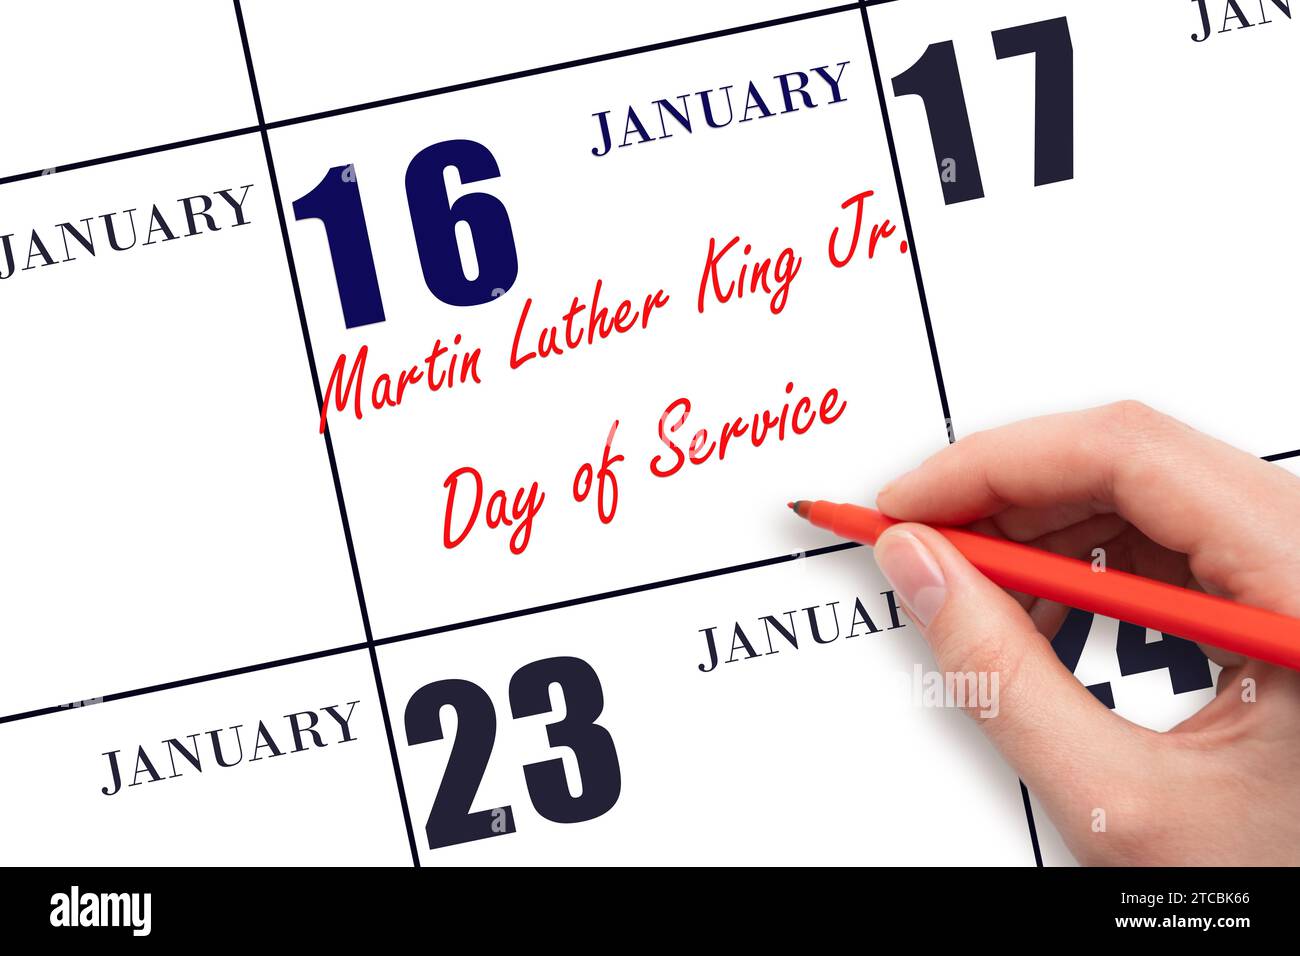 January 16. Hand writing text Martin Luther King Jr. Day of Service on calendar date. Save the date. Holiday. Day of the year concept. Stock Photo